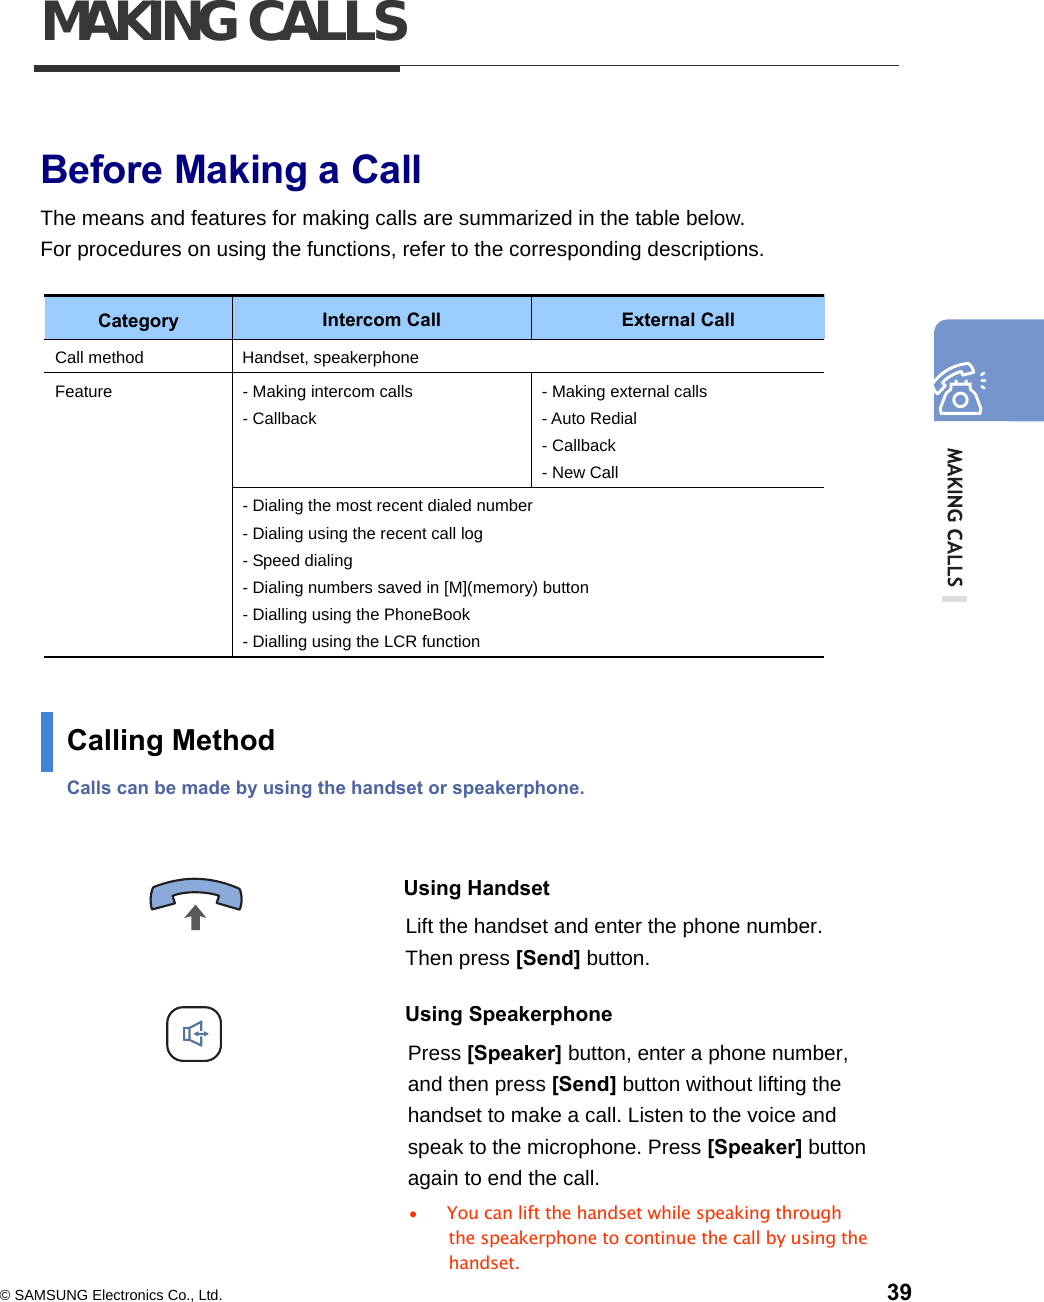  © SAMSUNG Electronics Co., Ltd. 39 MAKING CALLS  Before Making a Call The means and features for making calls are summarized in the table below.   For procedures on using the functions, refer to the corresponding descriptions.  Category   Intercom Call  External Call Call method  Handset, speakerphone - Making intercom calls - Callback - Making external calls - Auto Redial - Callback - New Call Feature - Dialing the most recent dialed number - Dialing using the recent call log - Speed dialing - Dialing numbers saved in [M](memory) button - Dialling using the PhoneBook - Dialling using the LCR function  Calling Method Calls can be made by using the handset or speakerphone.   Using Handset   Lift the handset and enter the phone number. Then press [Send] button.    Using Speakerphone  Press [Speaker] button, enter a phone number, and then press [Send] button without lifting the handset to make a call. Listen to the voice and speak to the microphone. Press [Speaker] button again to end the call.   •  You can lift the handset while speaking through the speakerphone to continue the call by using the handset.  